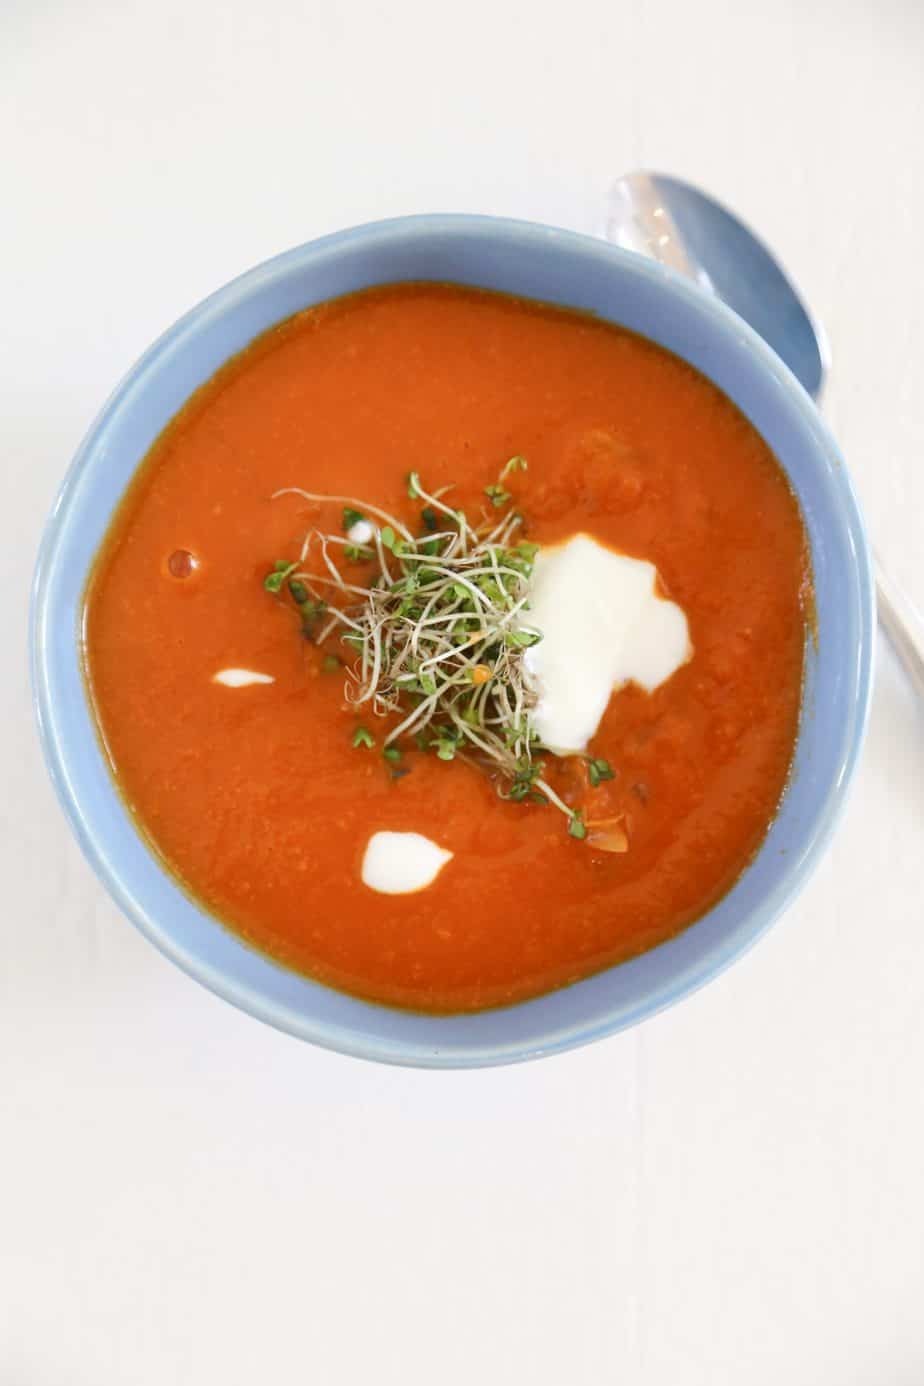 Gluten free tomato soup in a blue bowl with microgreens.